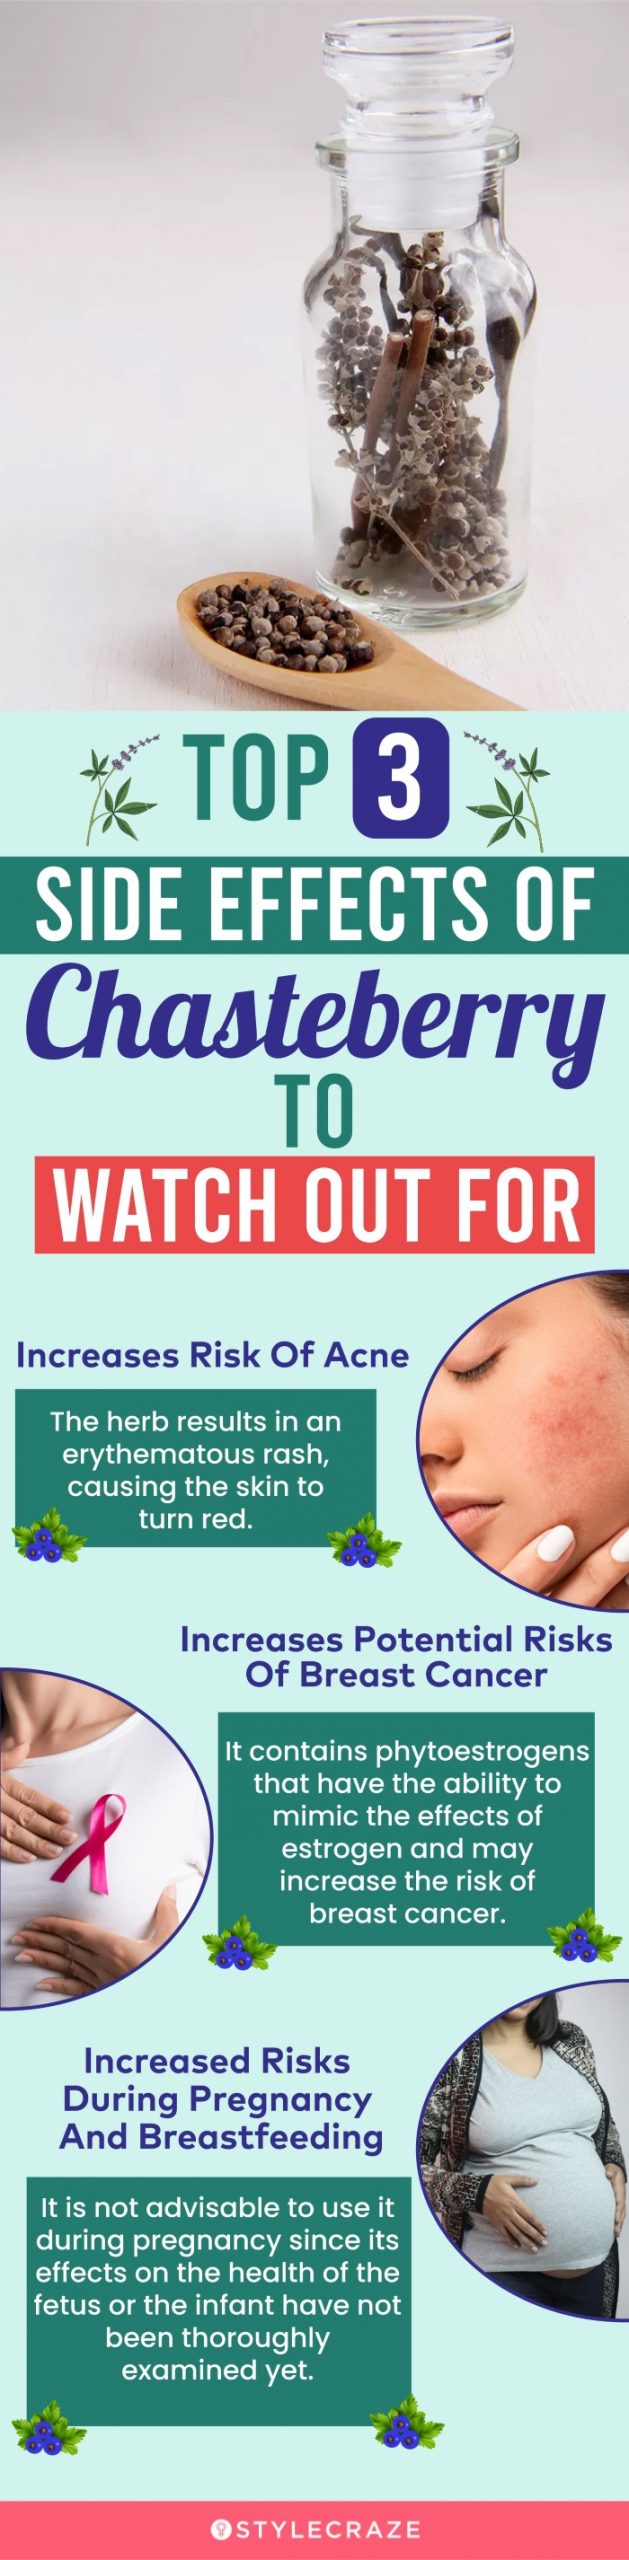 top 3 side effects of chasteberry to watch out for [infographic]